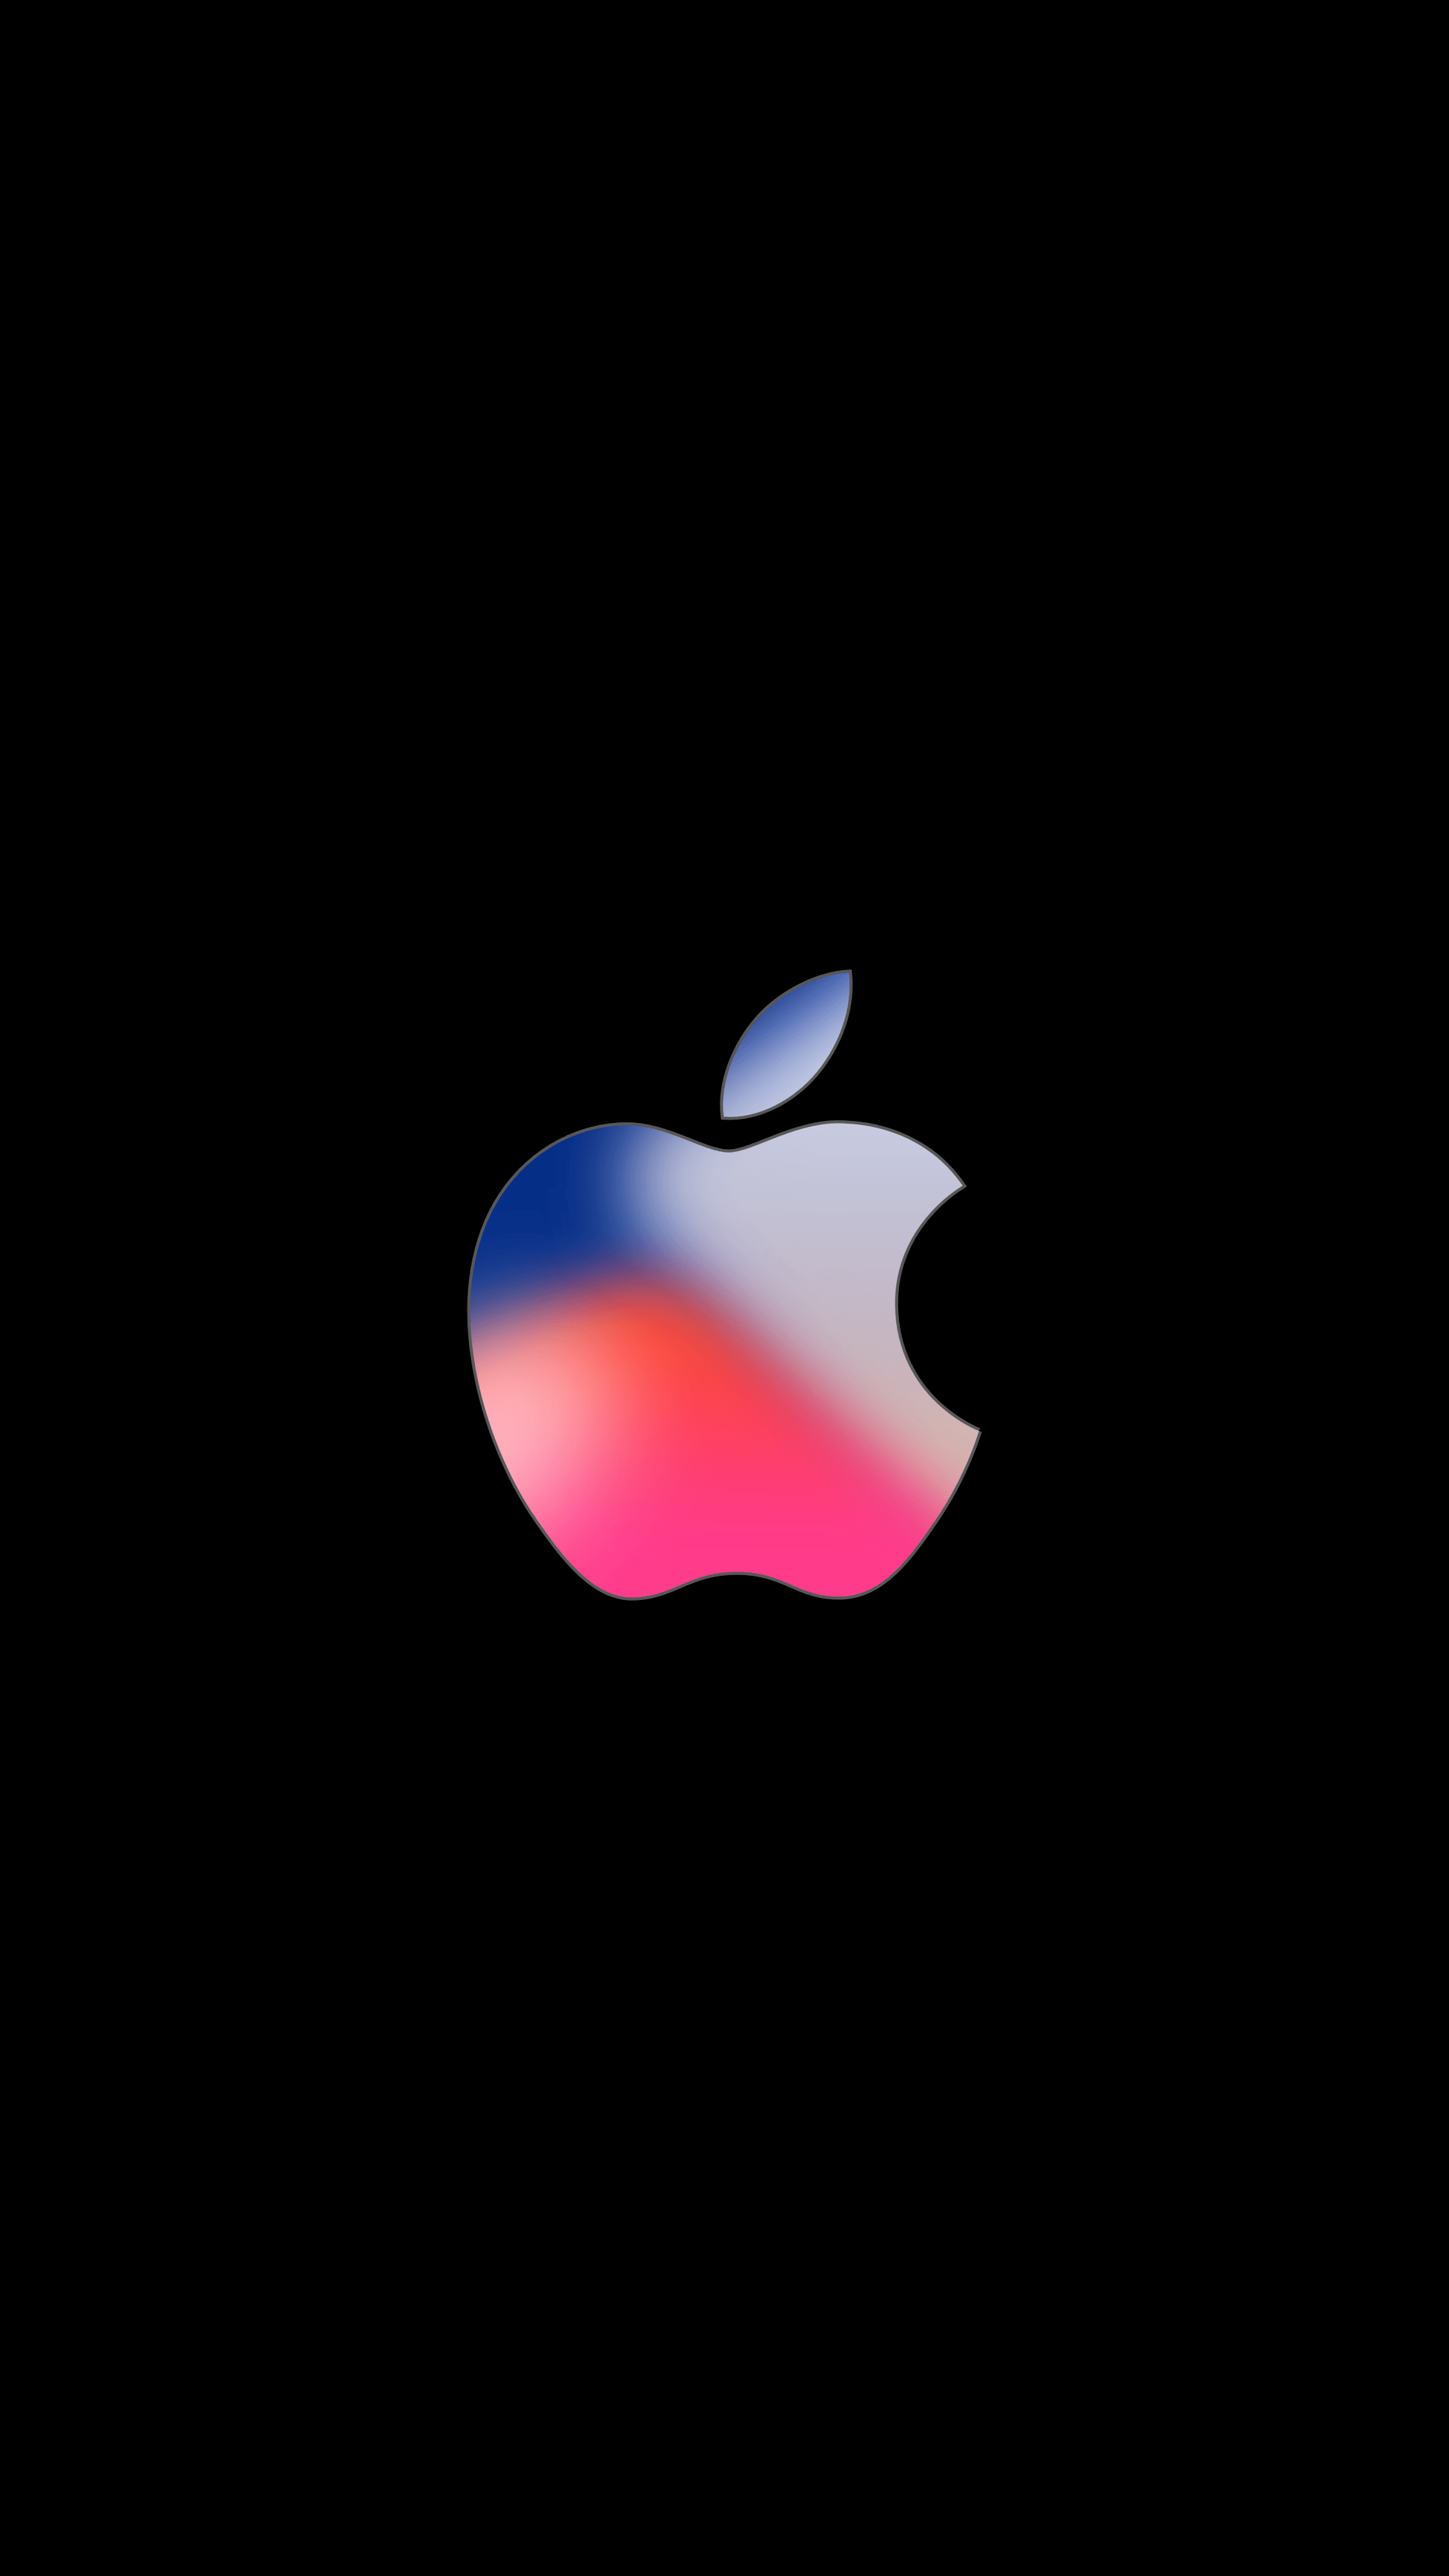 iPhone 8 Logo - Download September 12 iPhone 8 Event Wallpapers For iPhone, iPad and ...